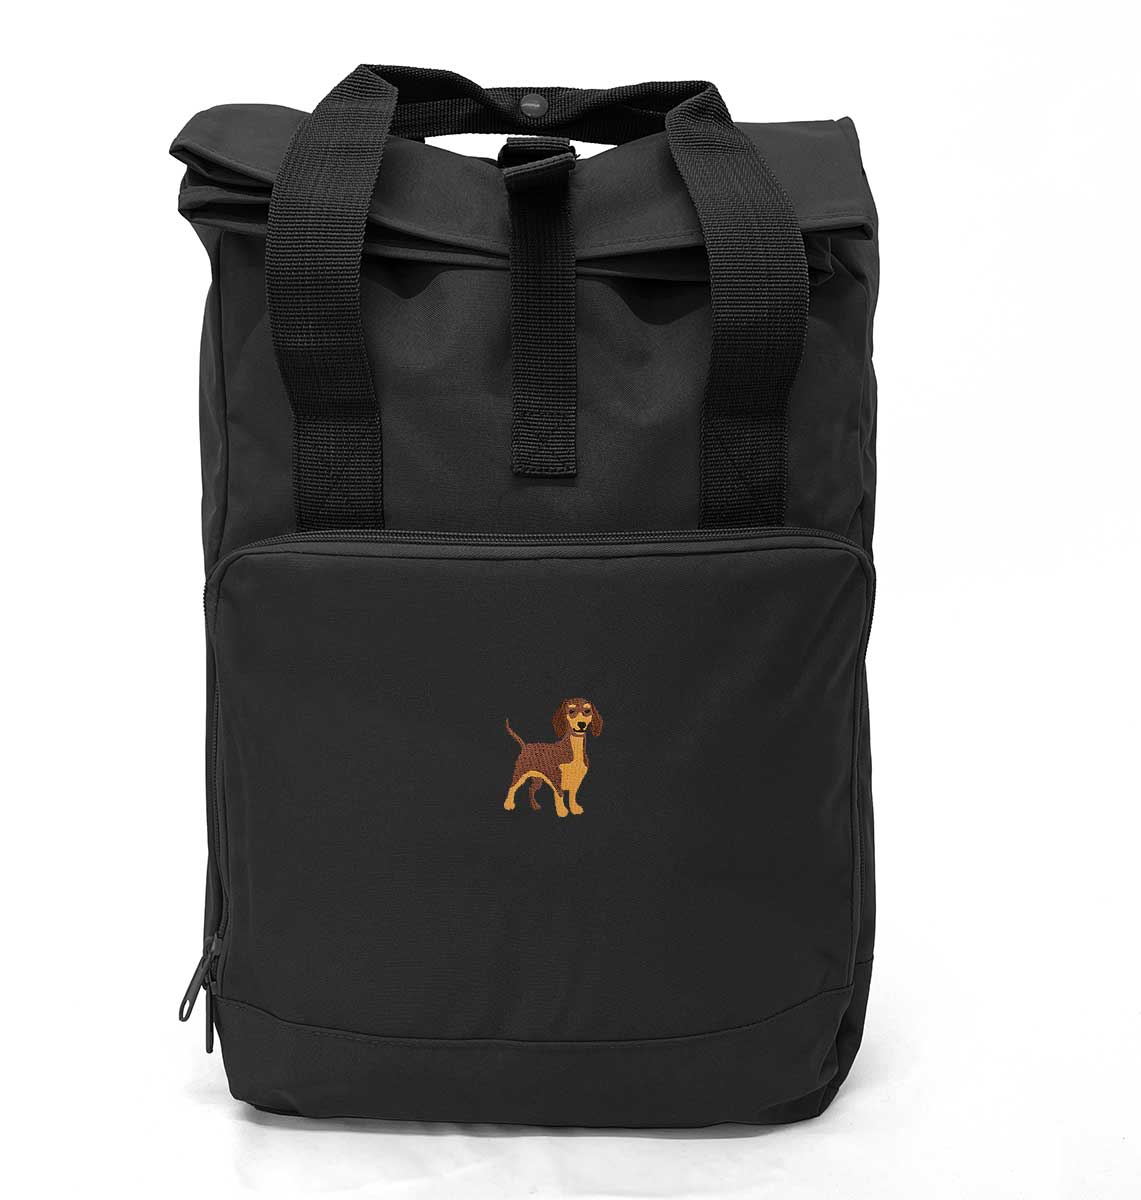 Dachshund Roll-top Laptop Recycled Backpack - Blue Panda